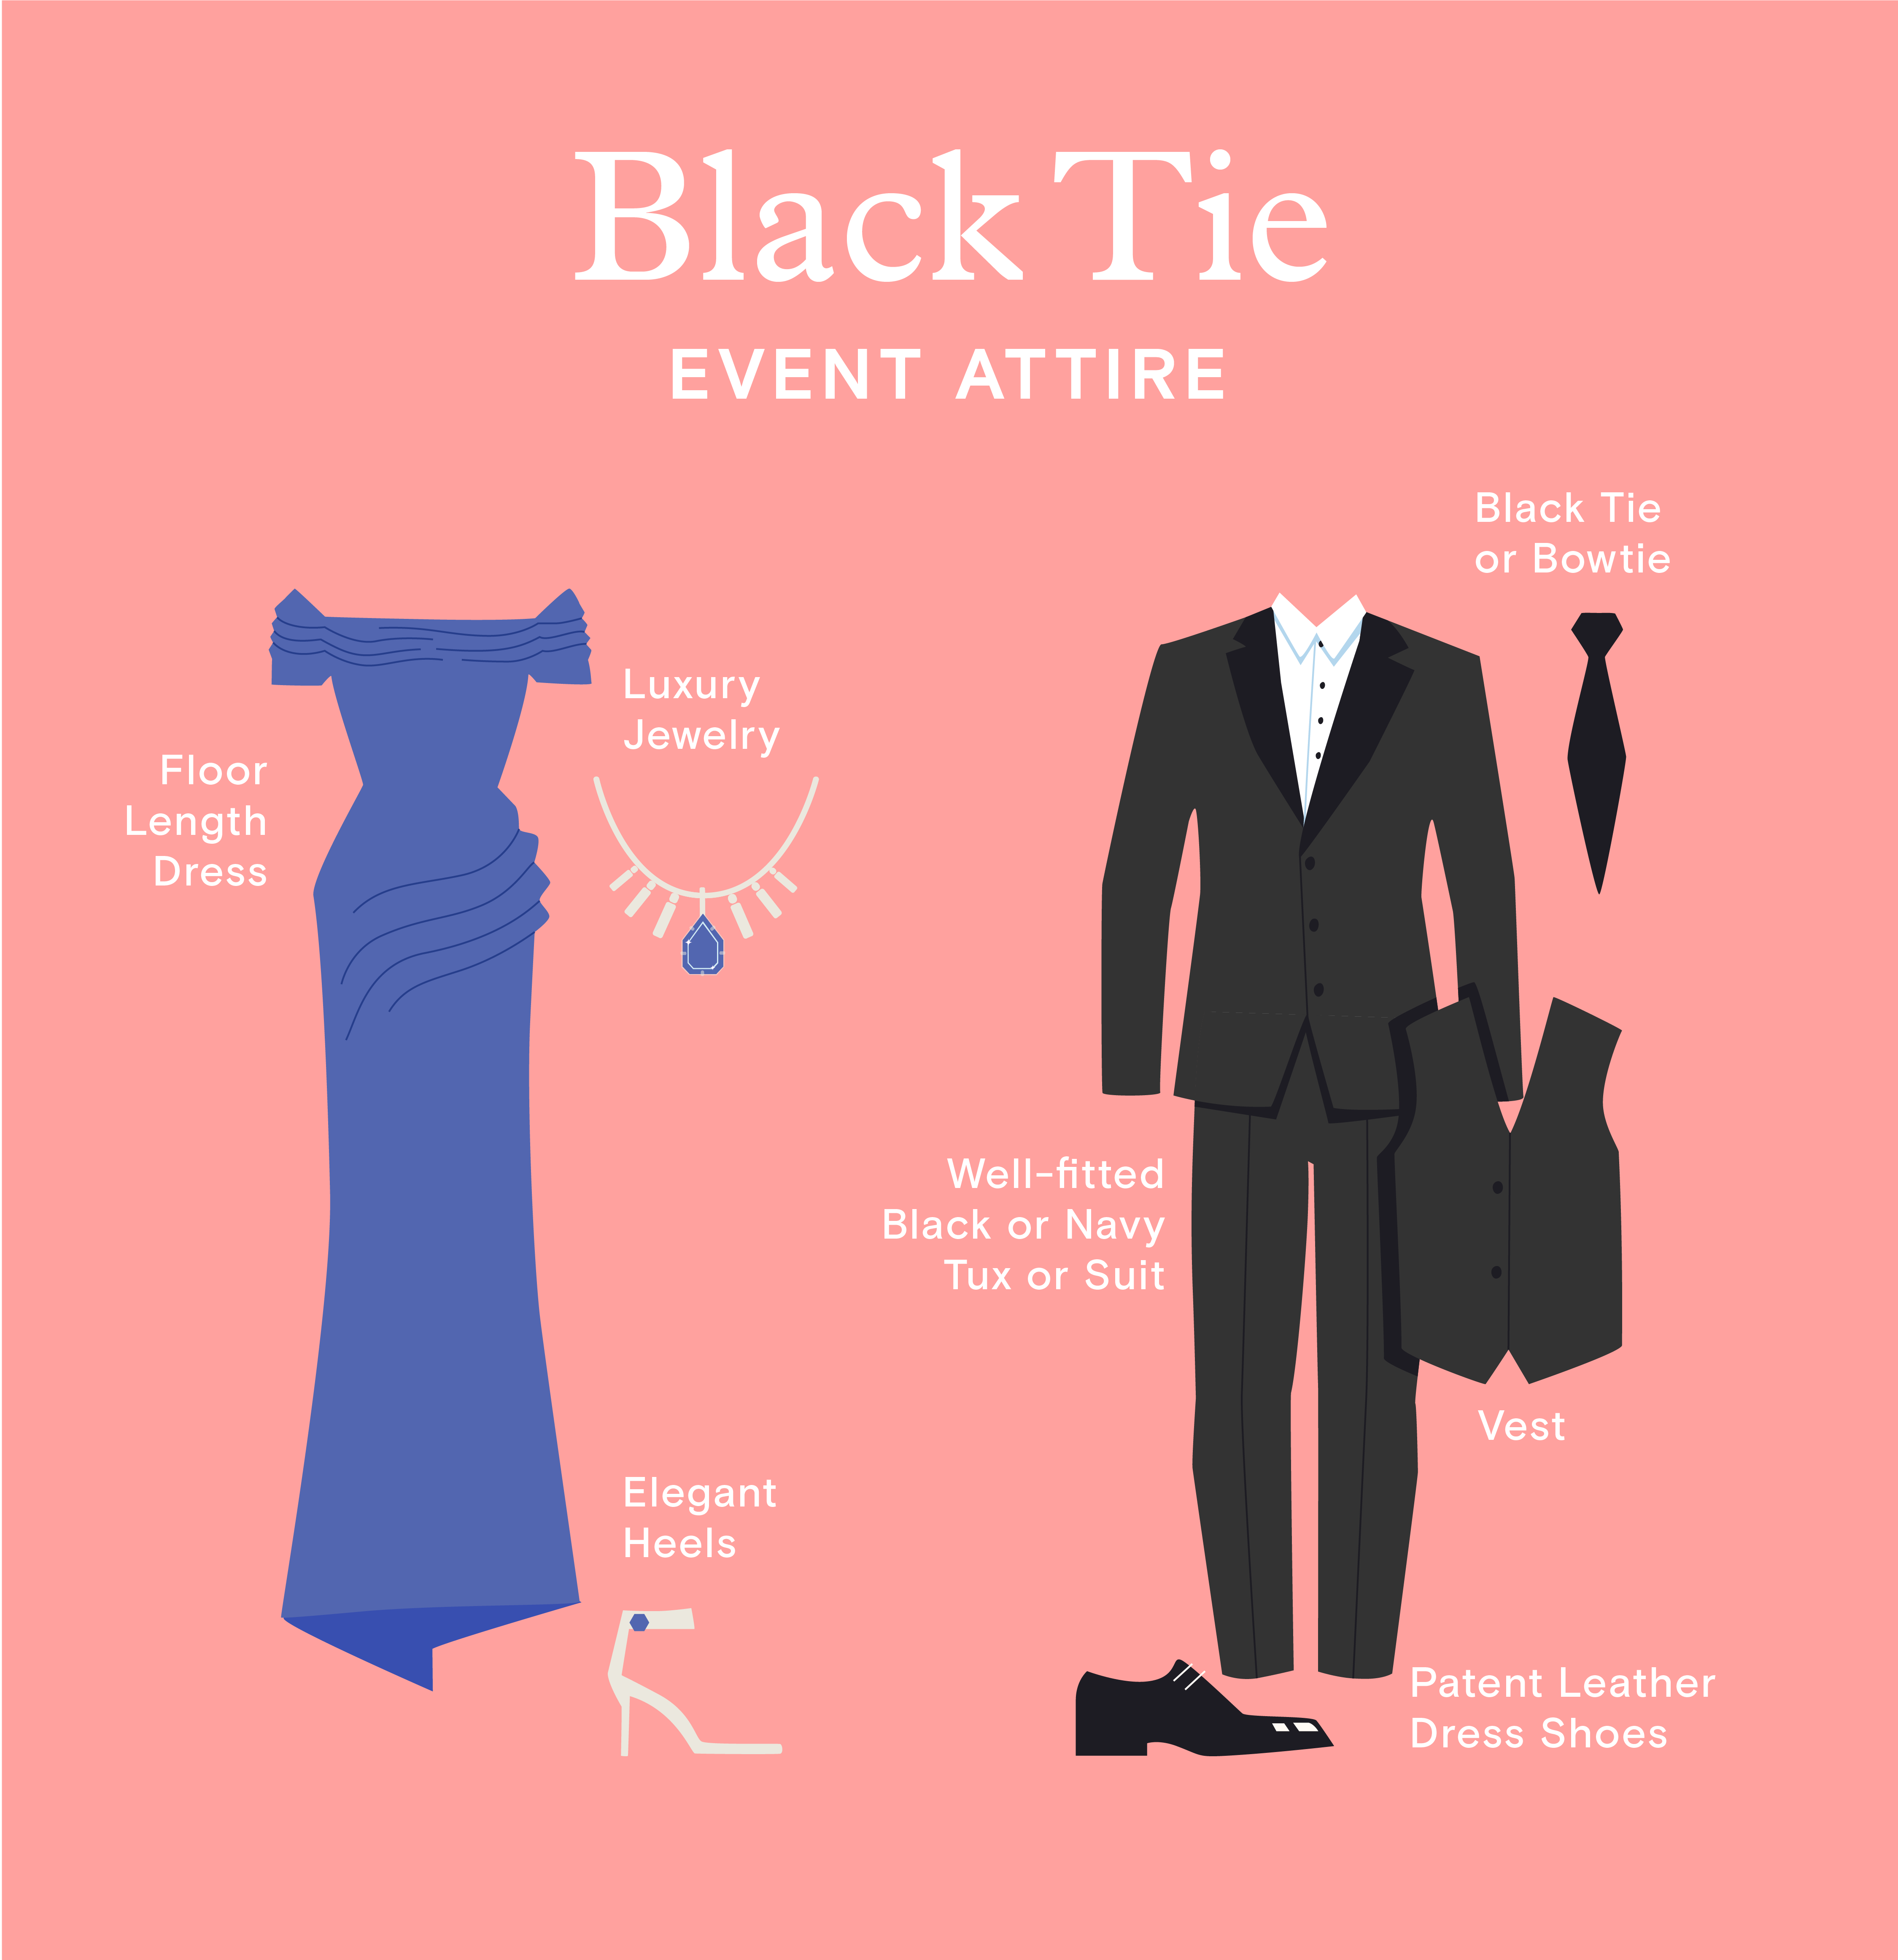 An illustration of black tie attire for women and for men featuring items from the list like a floor-length dress, elegant heels, and a well-fitted black tux.